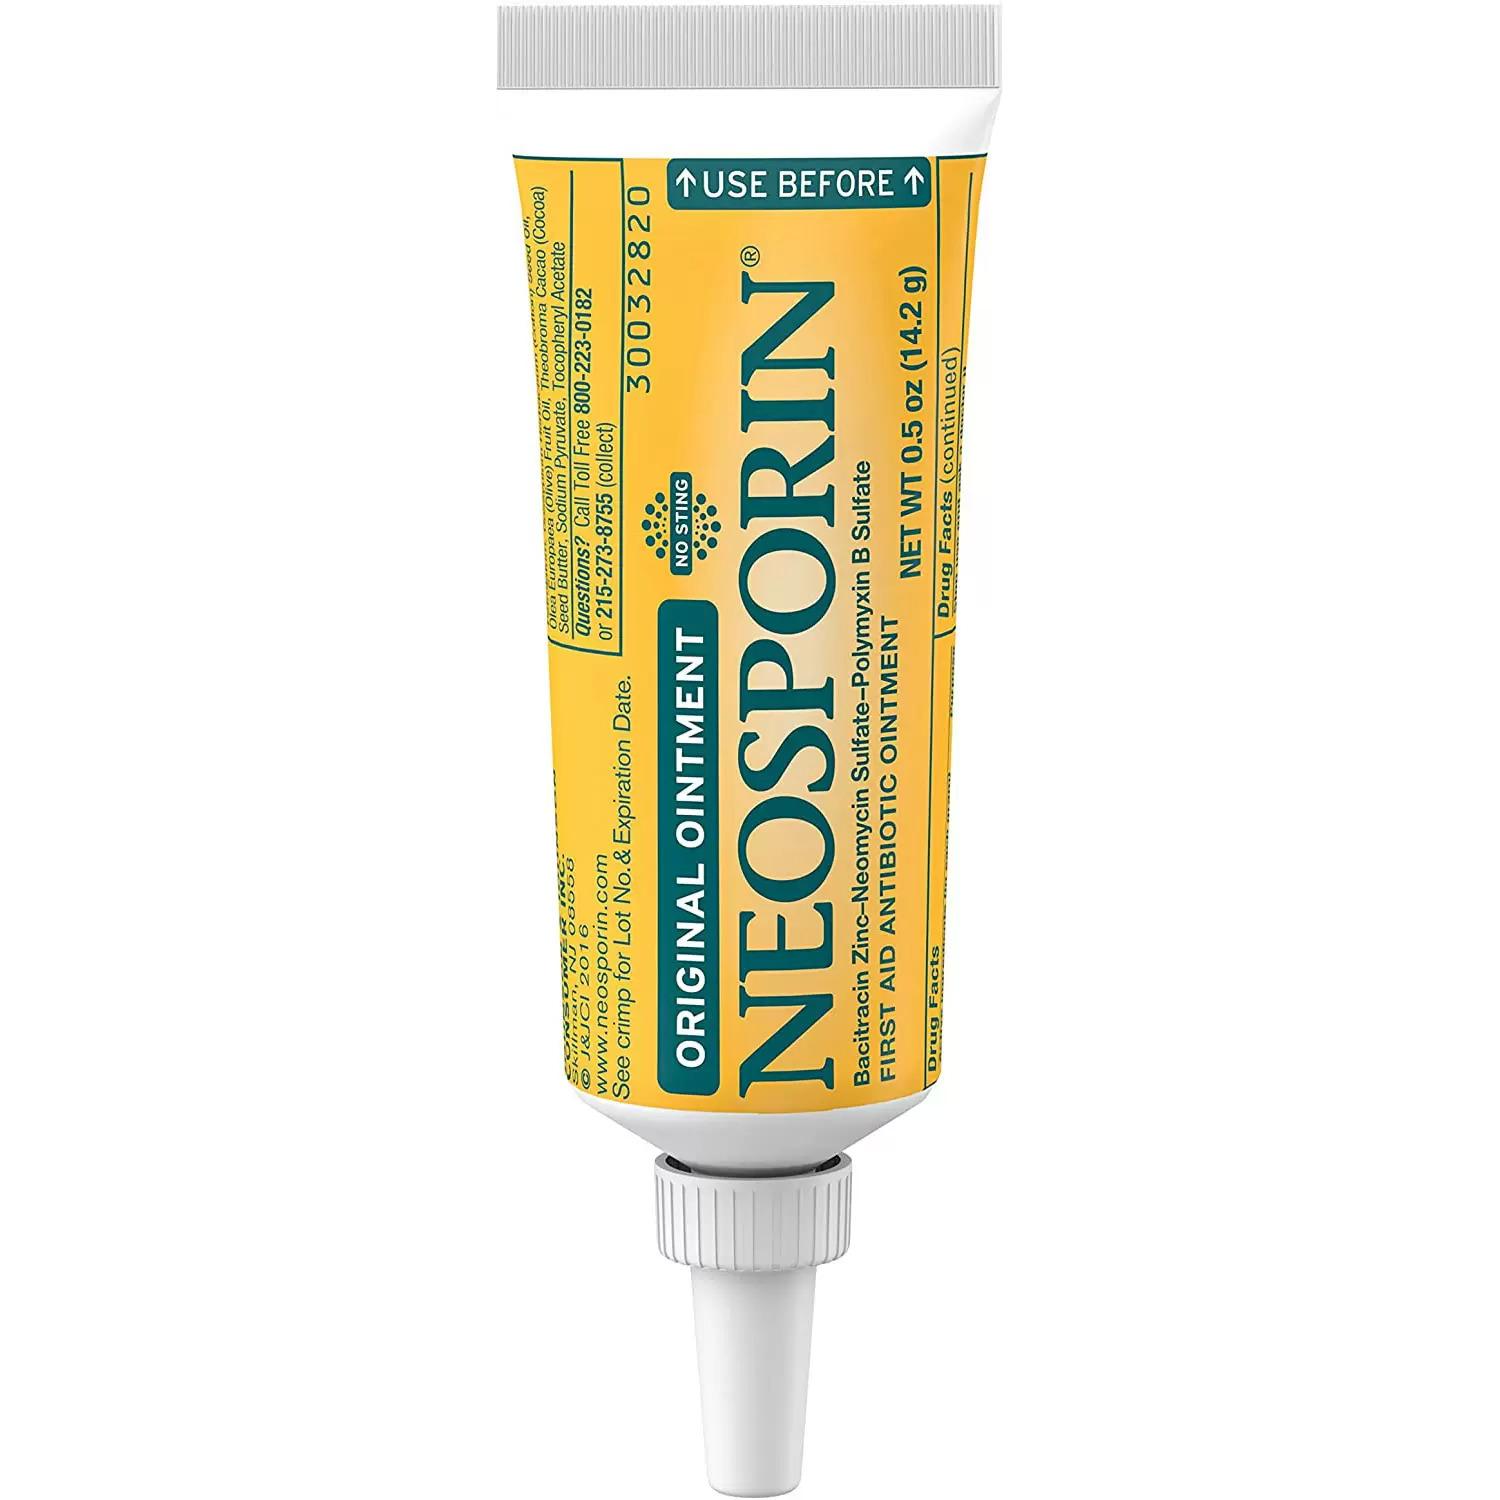 Neosporin Original First Aid Antibiotic Ointment for $2.99 Shipped